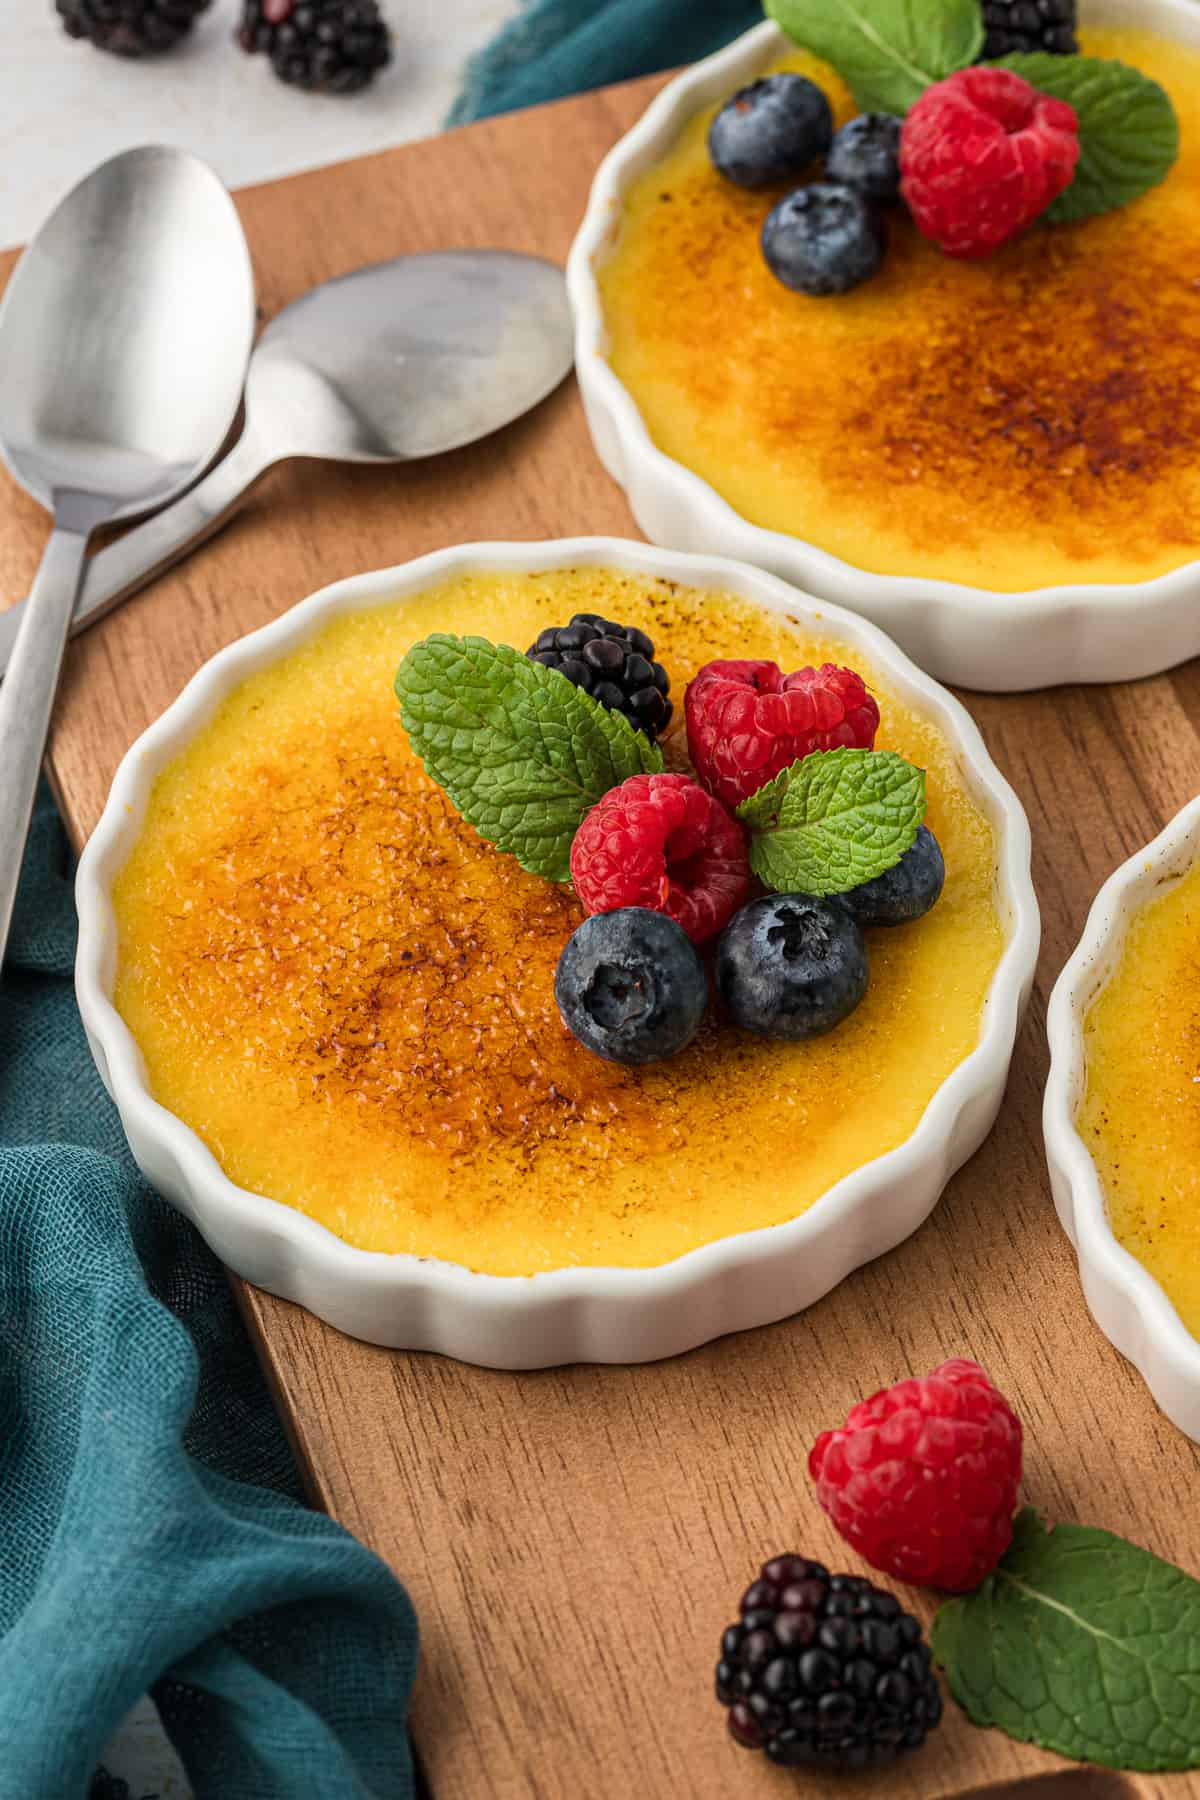 creme brulee in white ramekins on a wooden cutting board with two spoons, on top of a dark teal towel with fresh berries and mint leaves topping the creme brulee and more sprinkled around